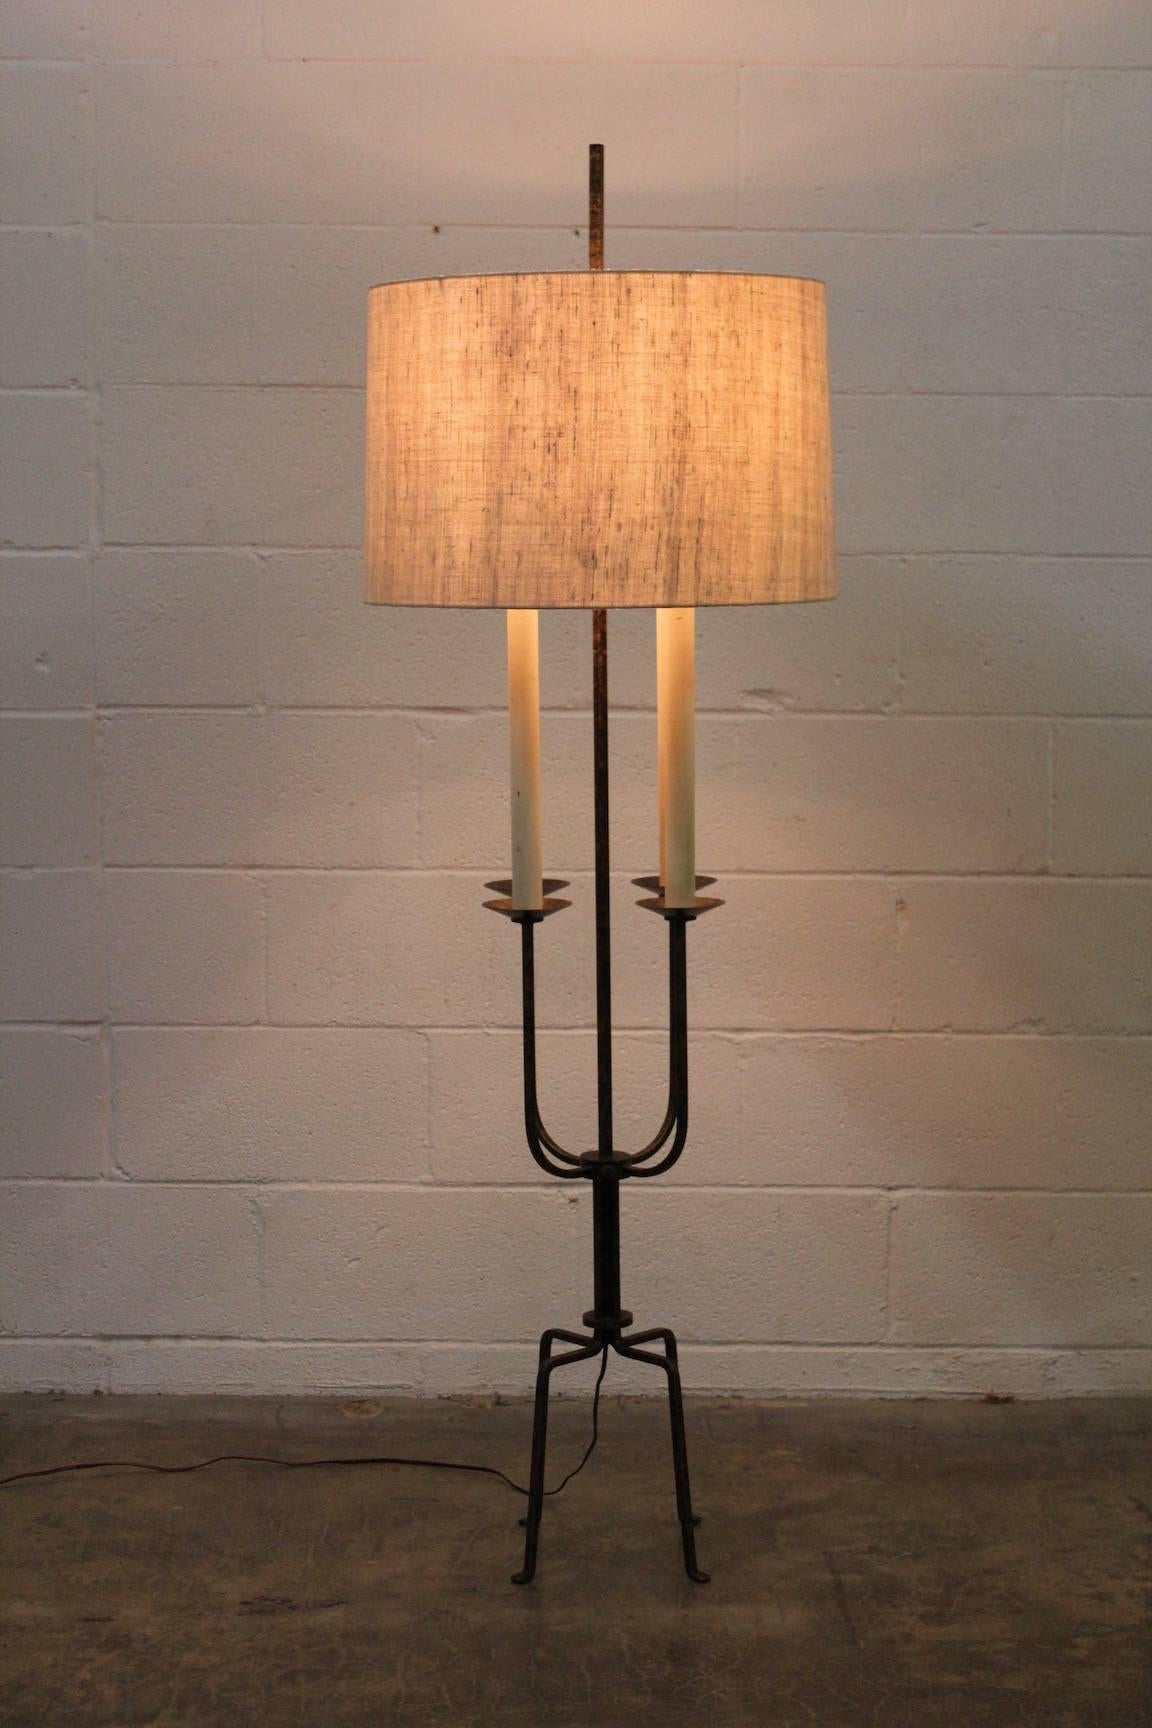 A gilt-iron floor lamp with linen shade designed by Tommi Parzinger for Parzinger originals. Original finish and new shade.